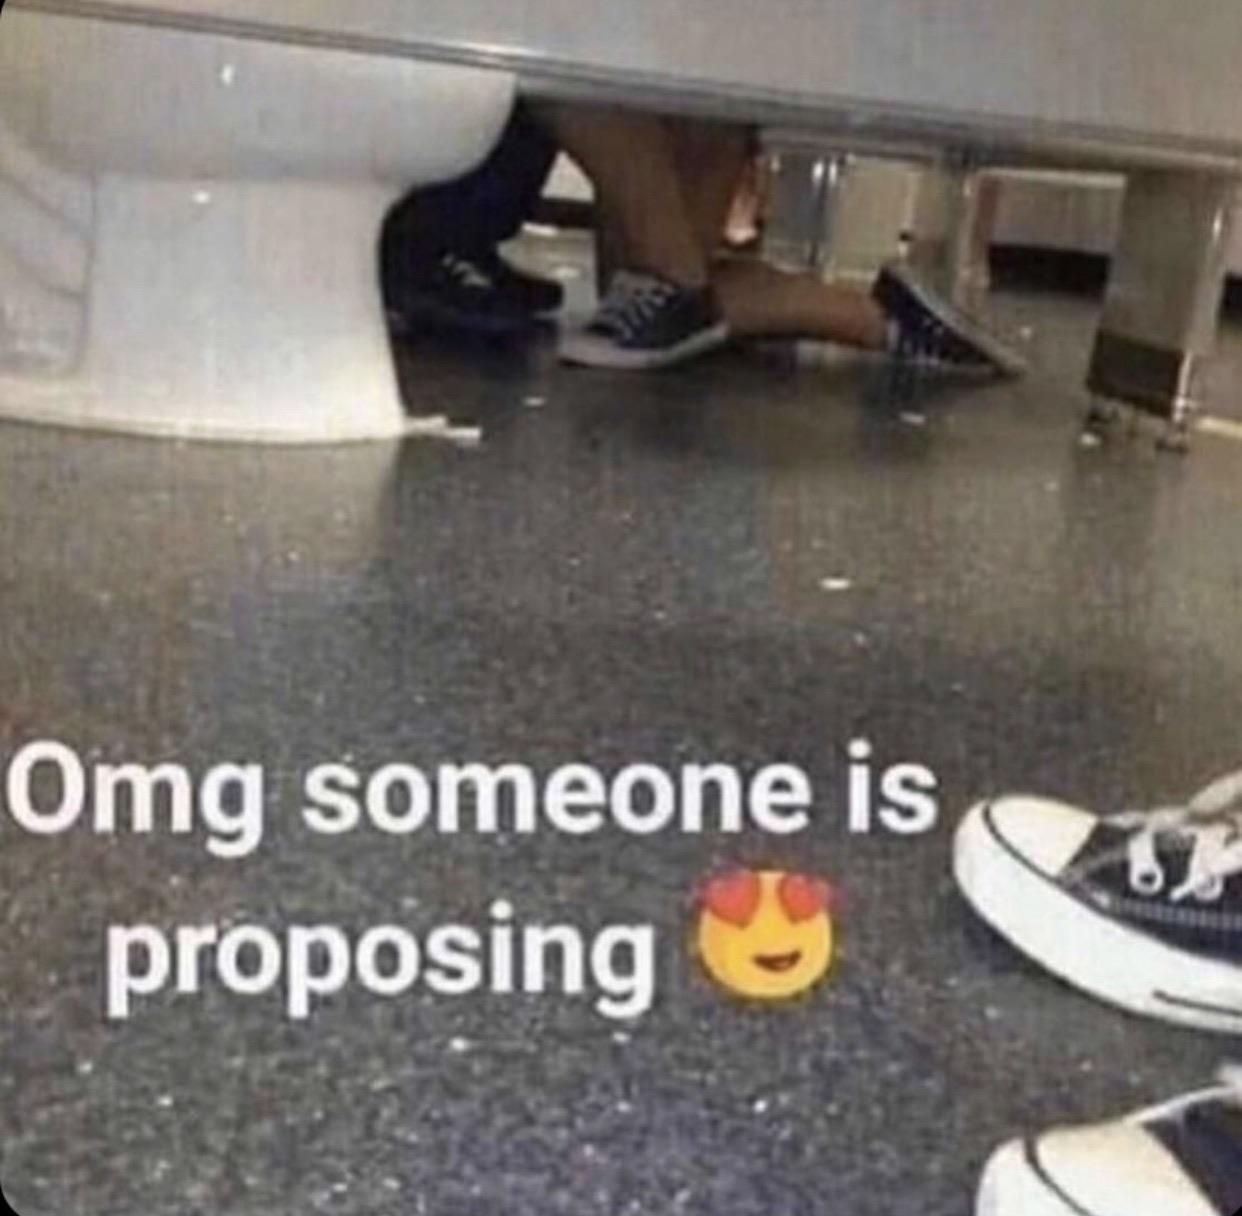 Interesting place to propose